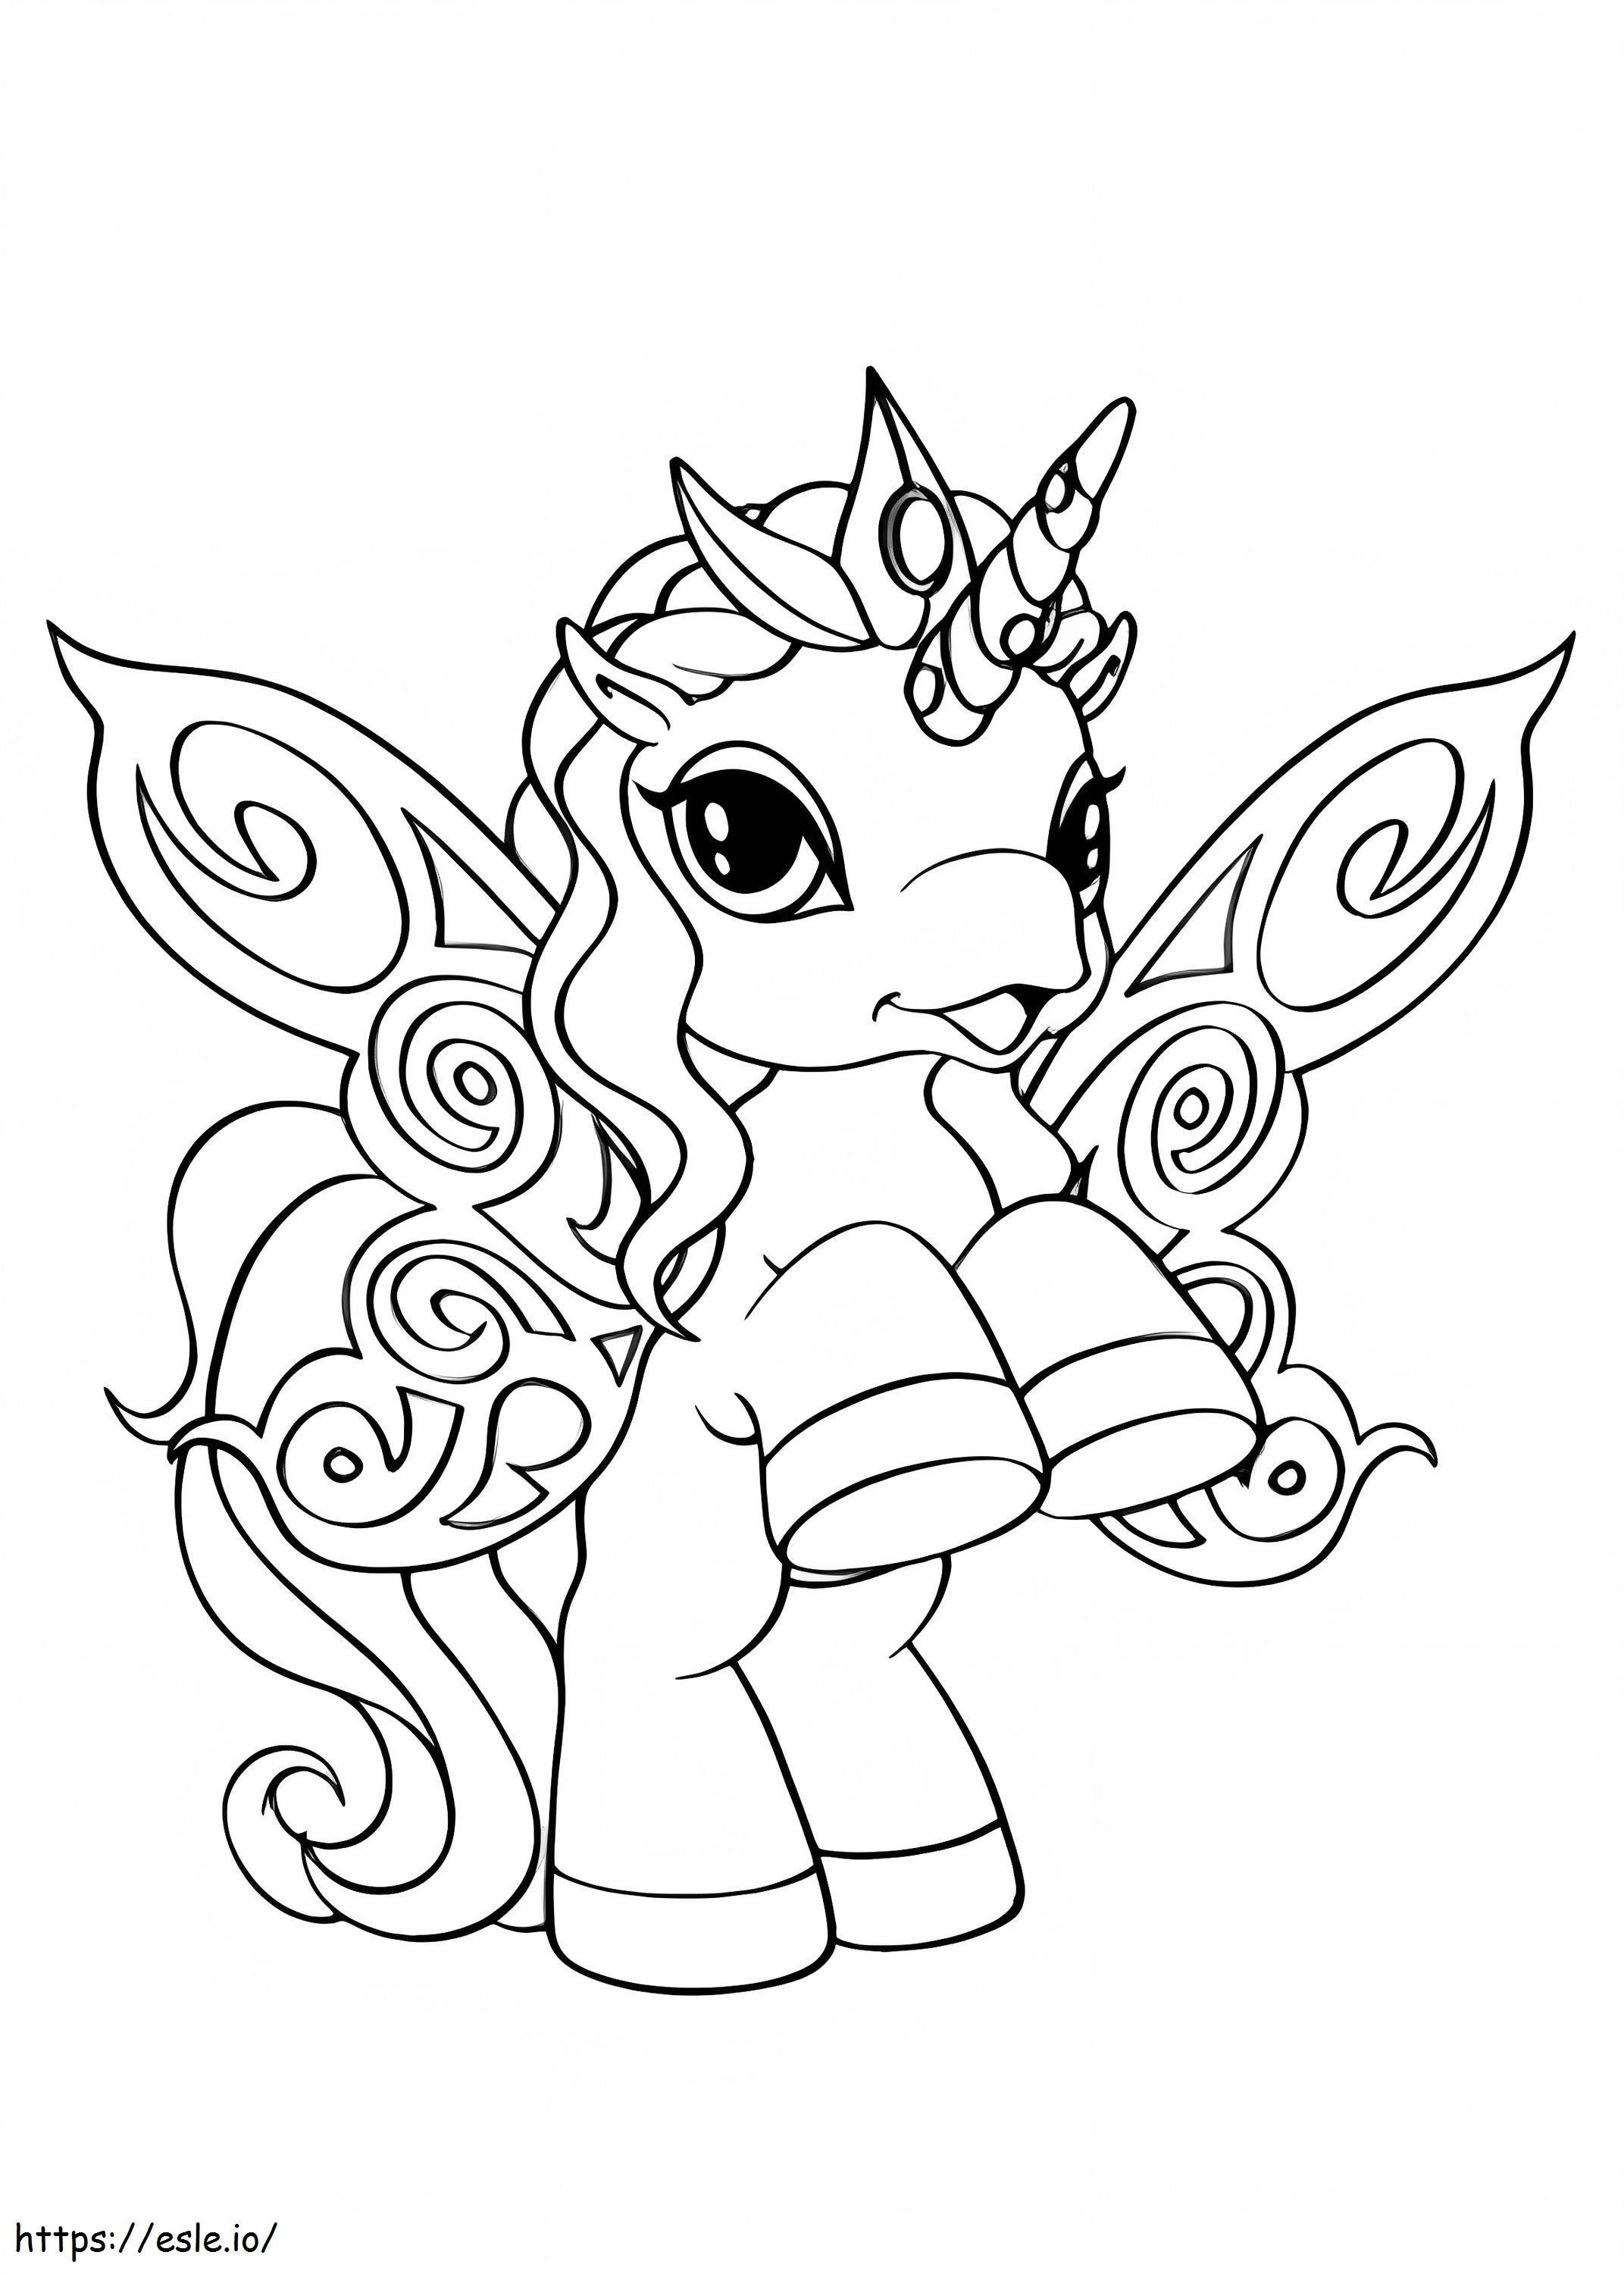 Filly Funtasia 4 coloring page